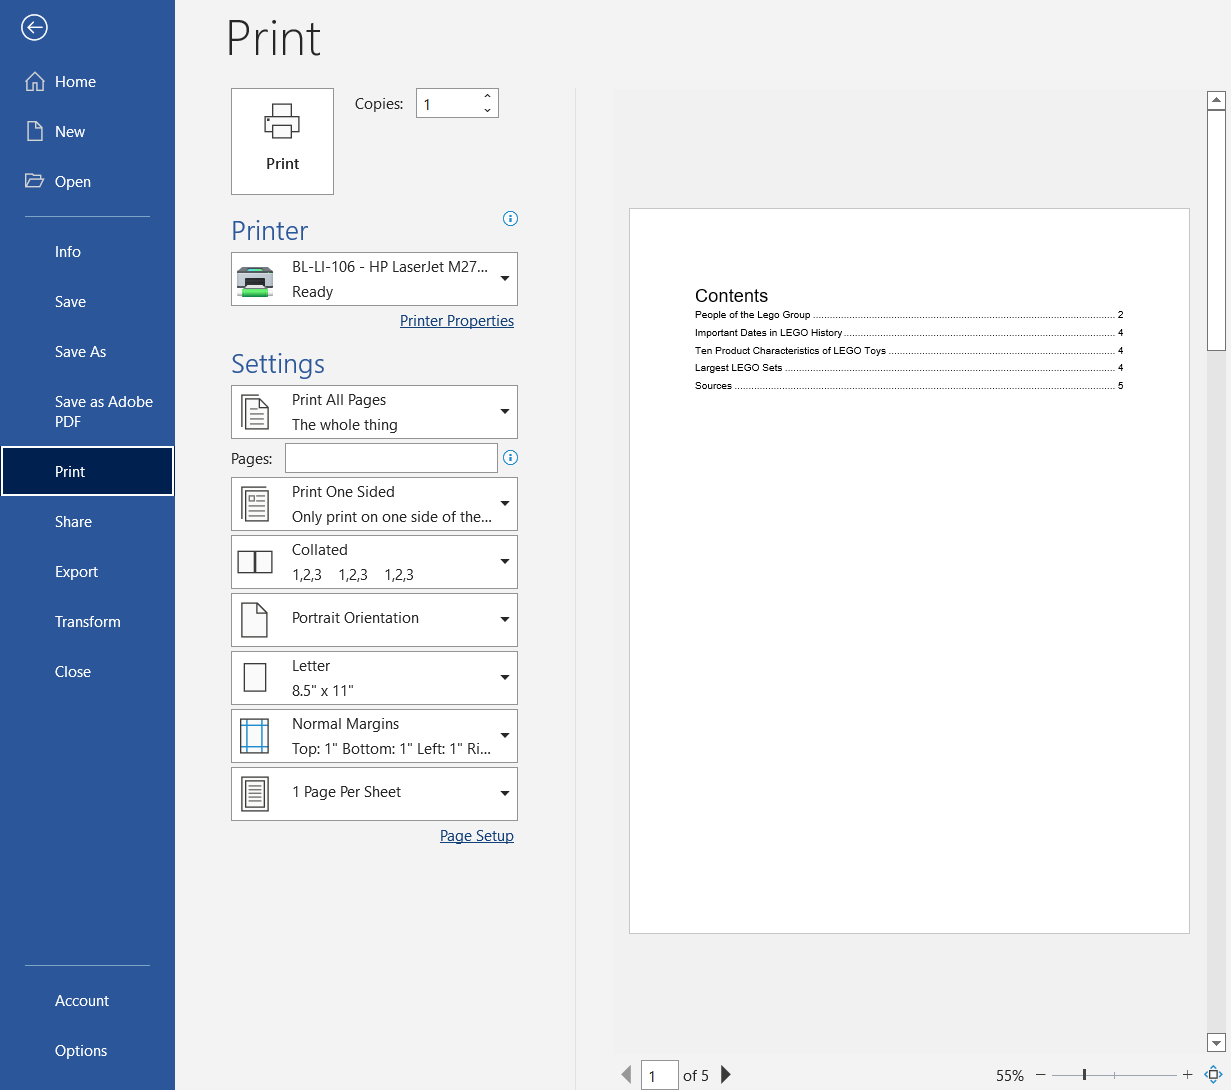 Print options in Microsoft Word for Windows. Options are described below.